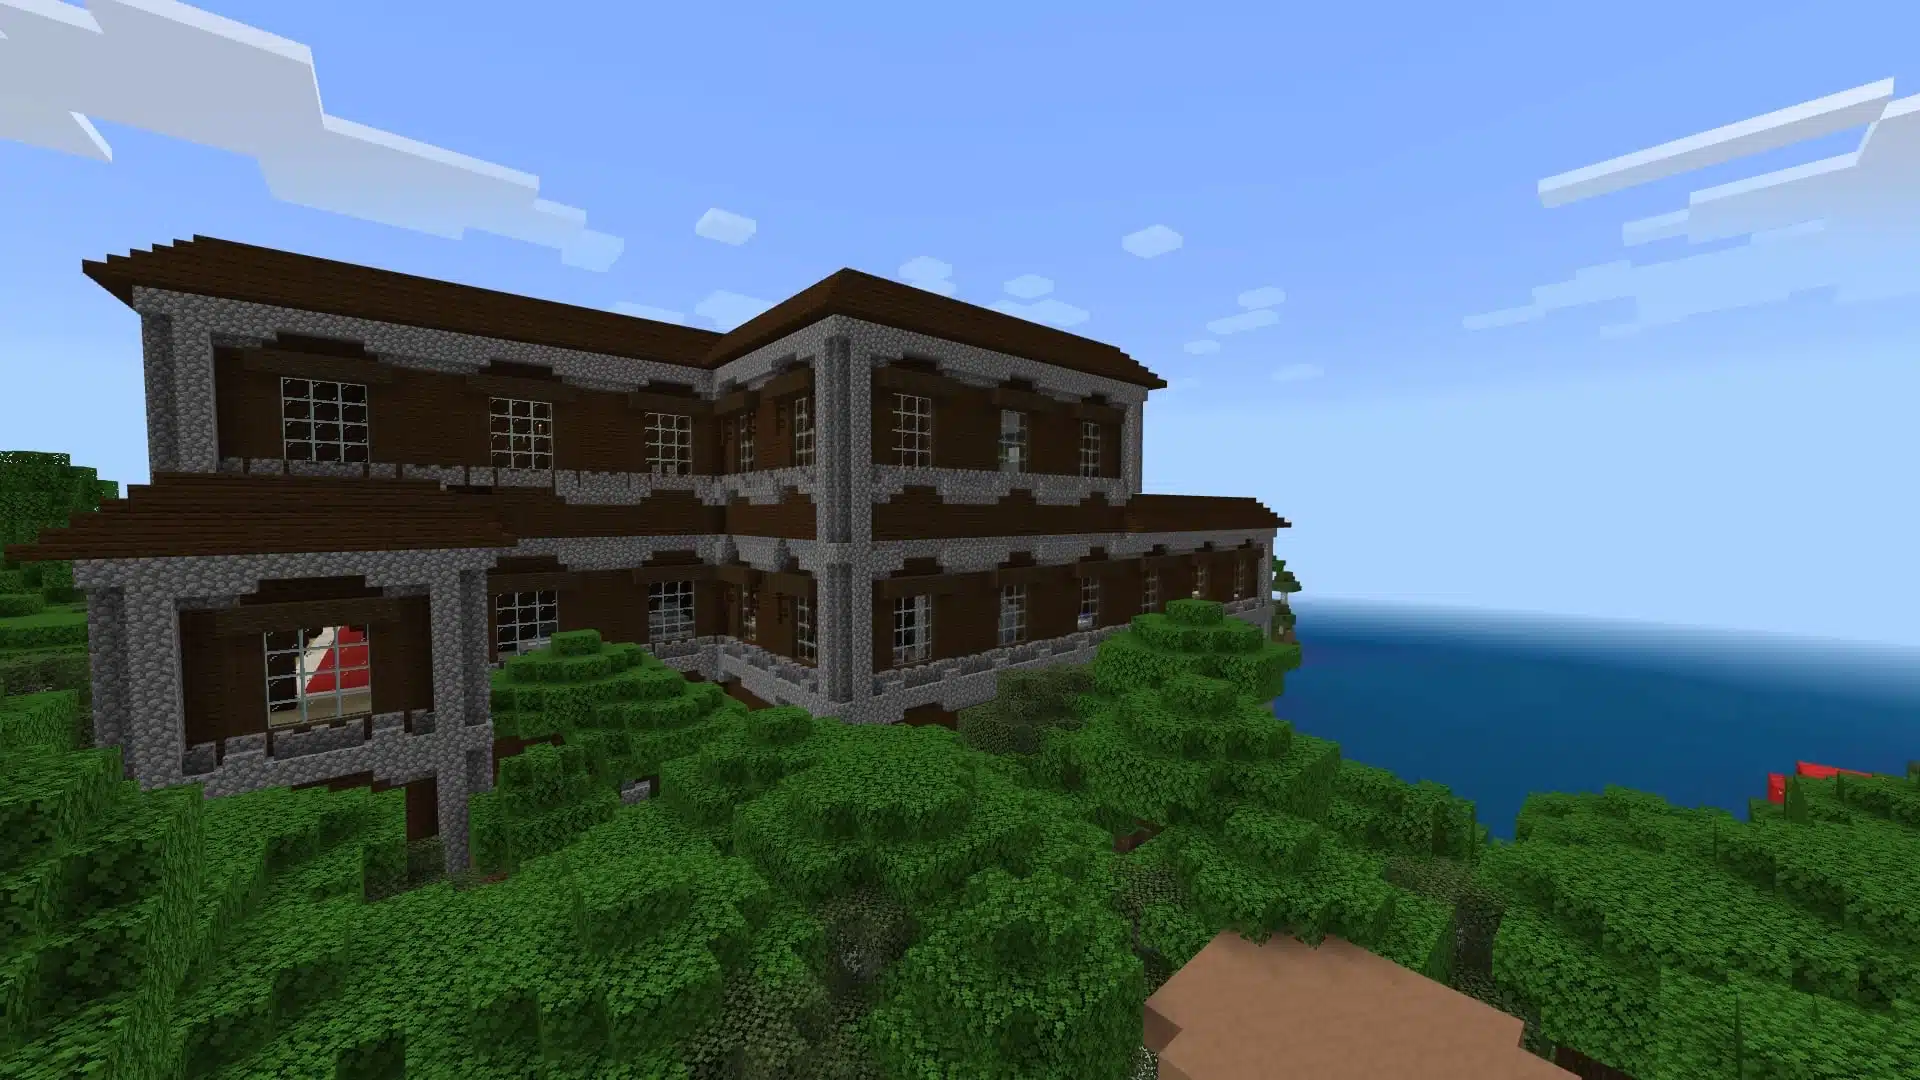 Best Minecraft Seeds For Villages, Temples, and Shipwrecks (All Platforms)